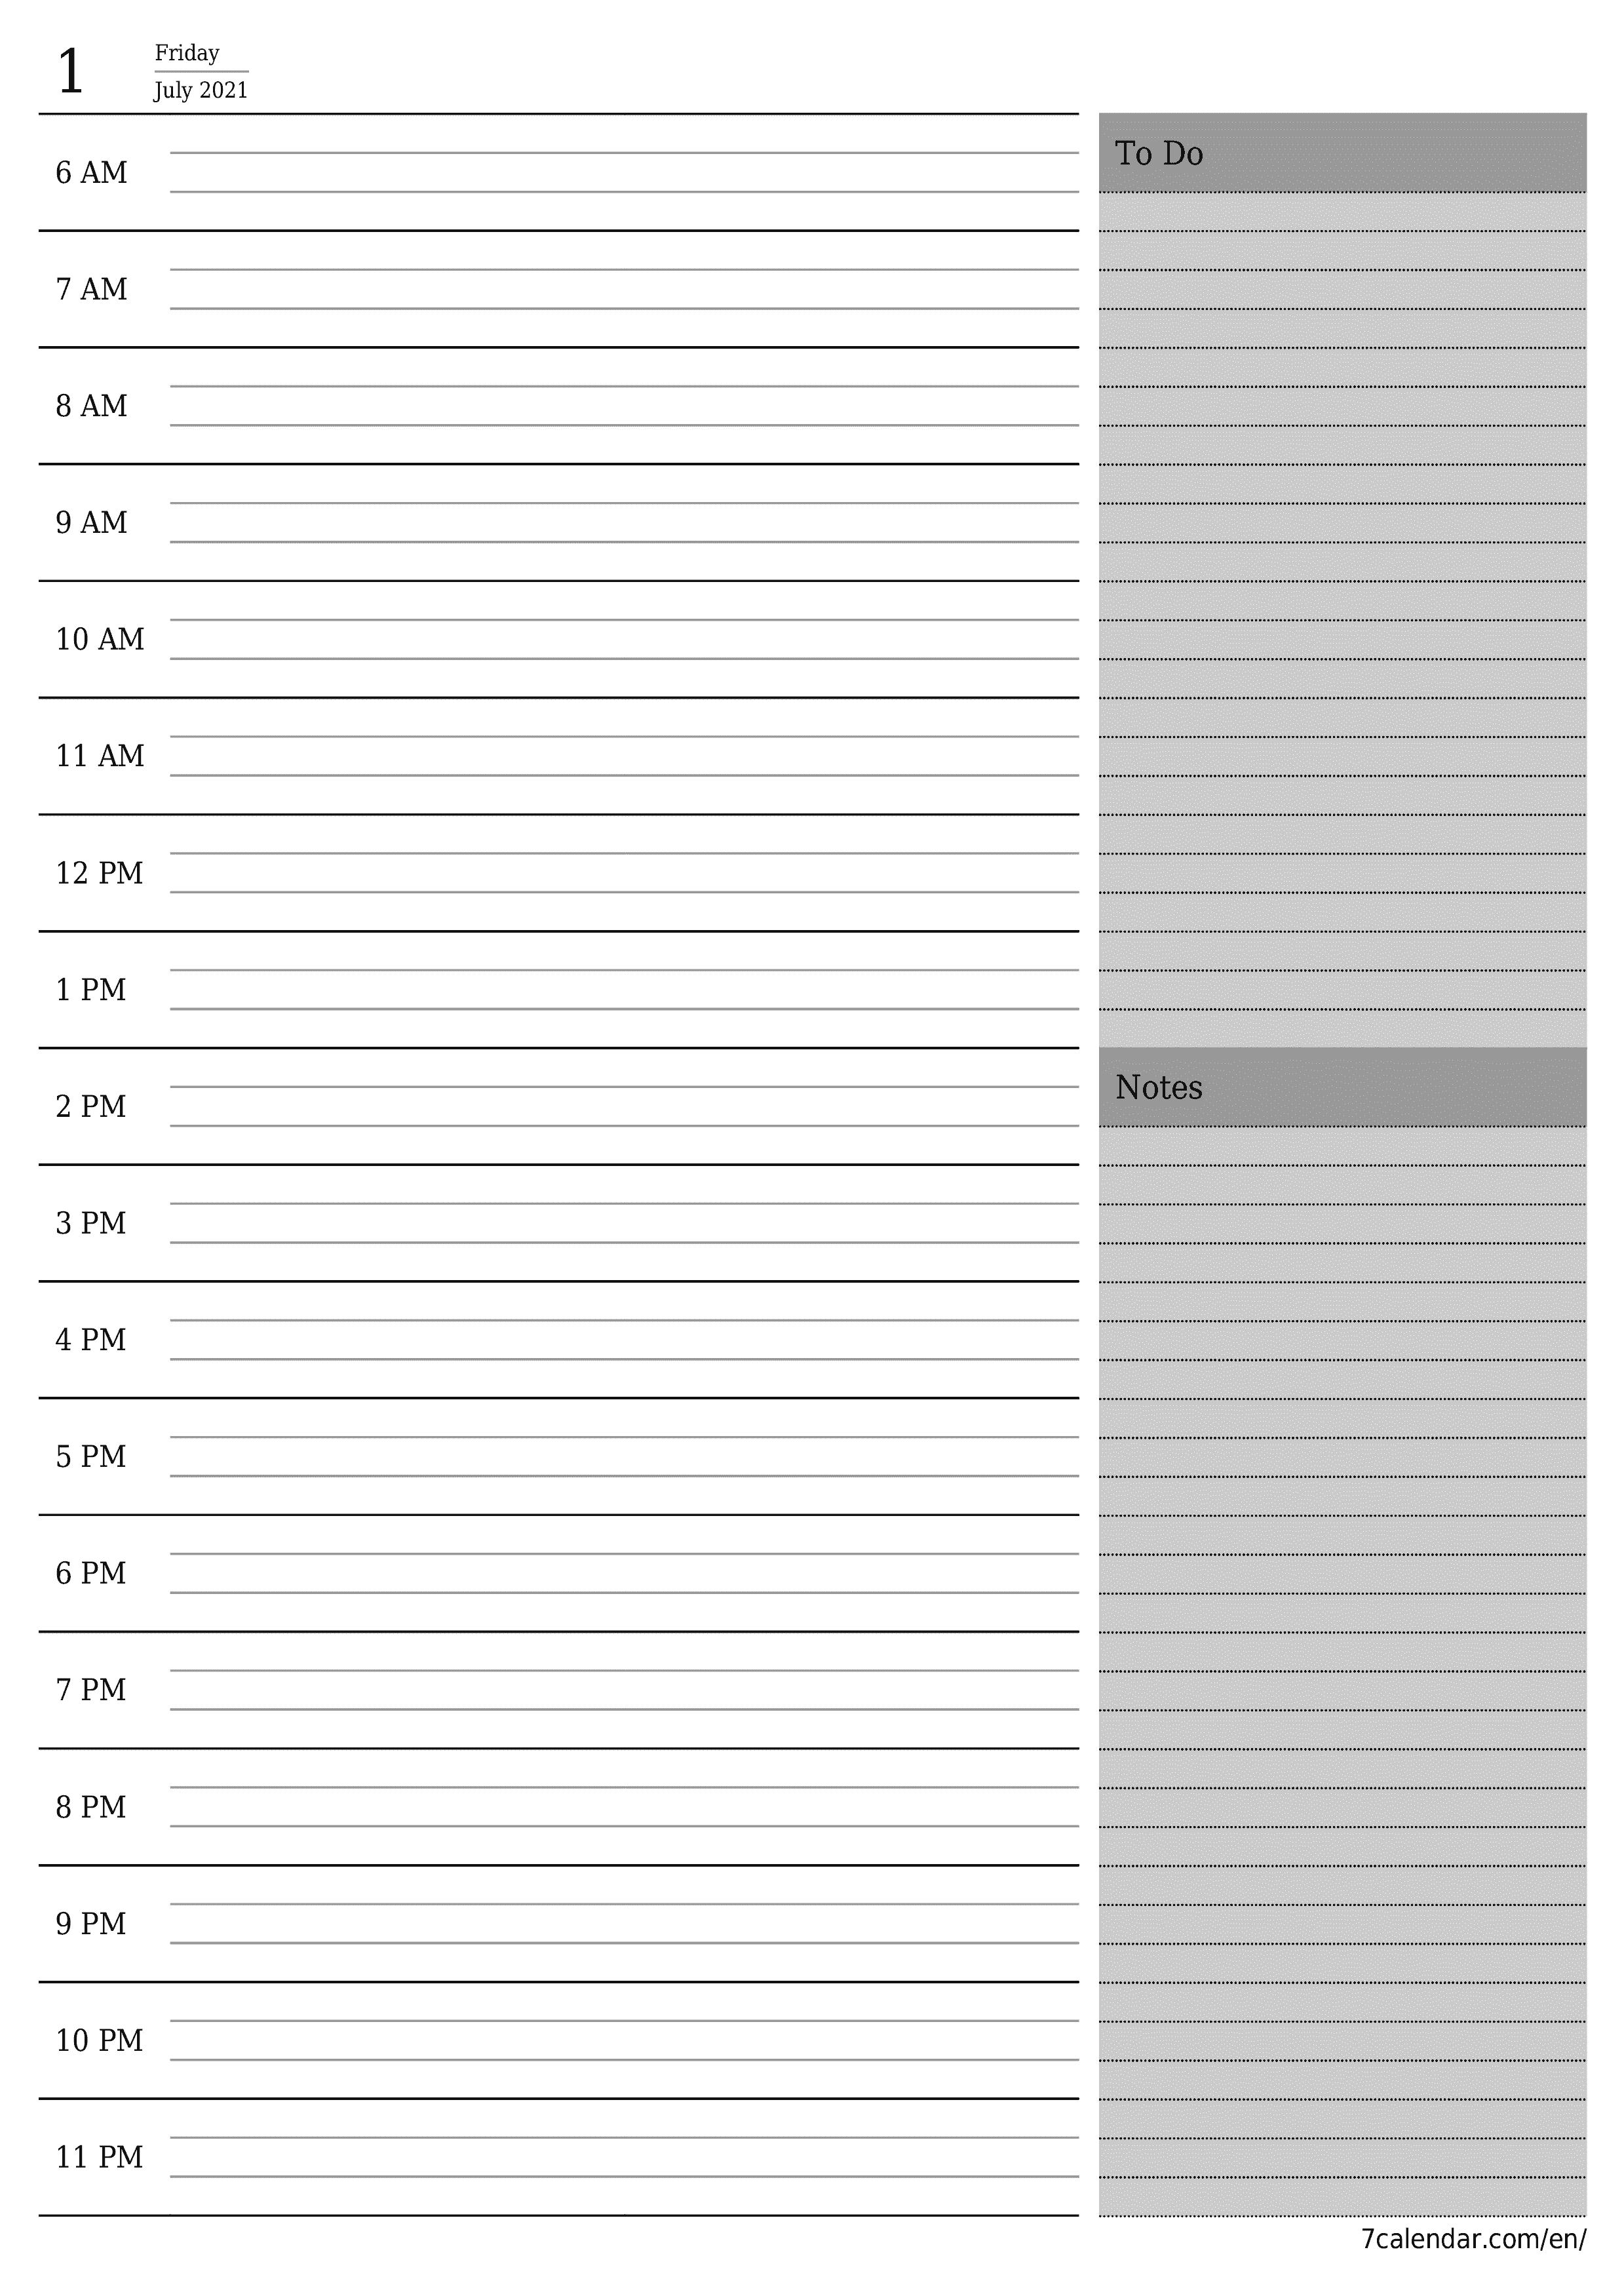 Blank daily printable calendar and planner for day July 2021 with notes, save and print to PDF PNG English